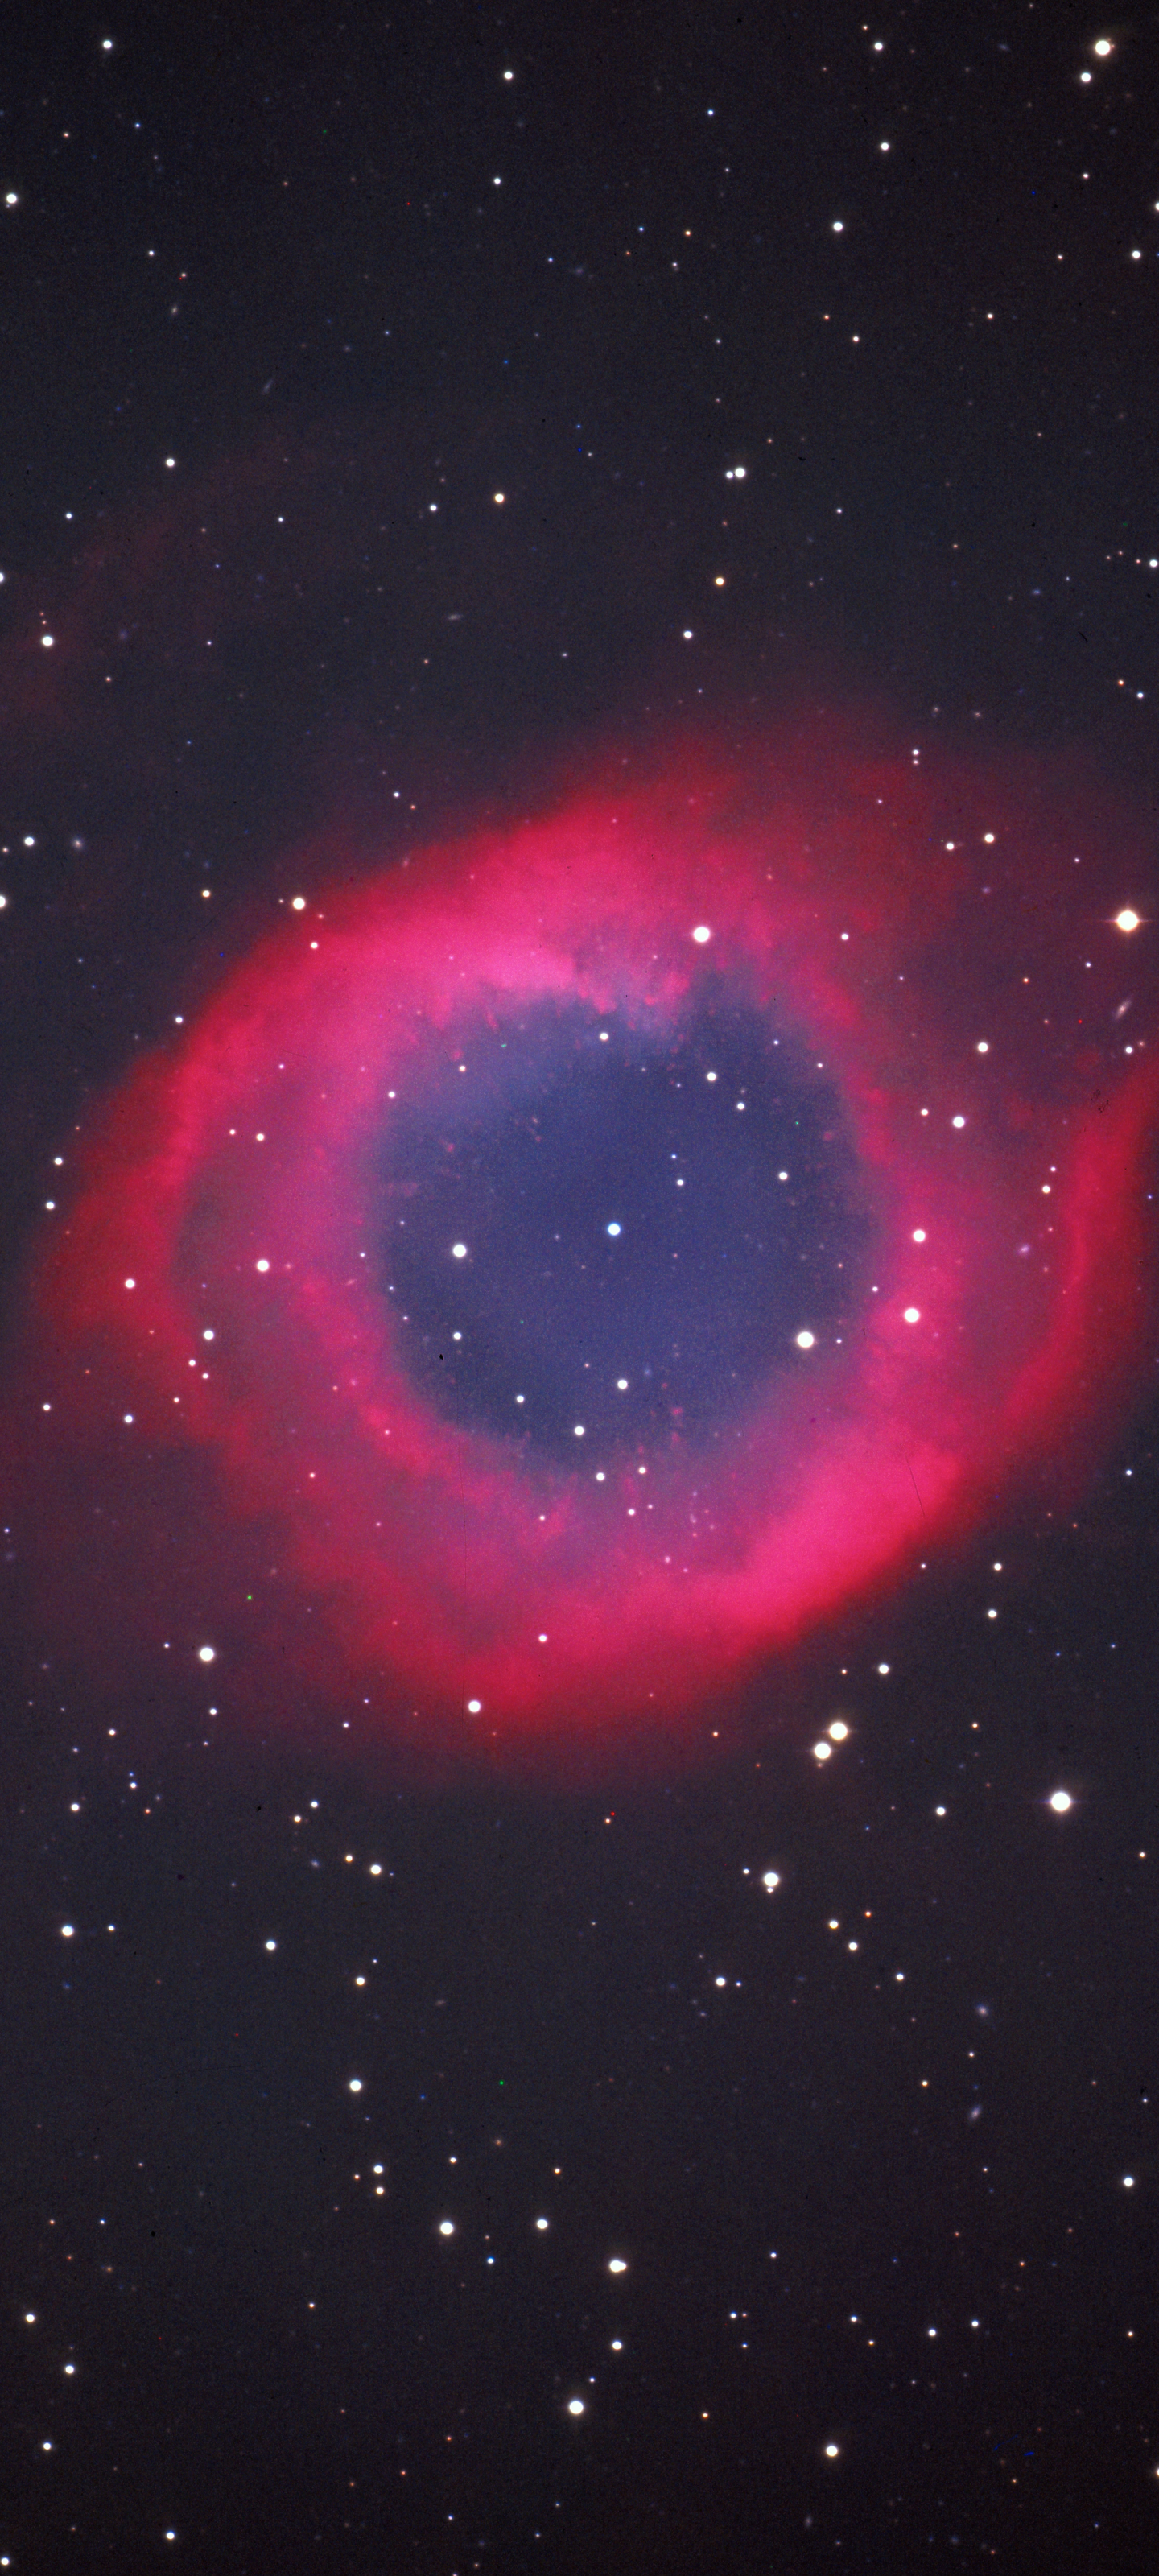 The Helix Nebula - NGC 7293 or Caldwell 63 by ESO